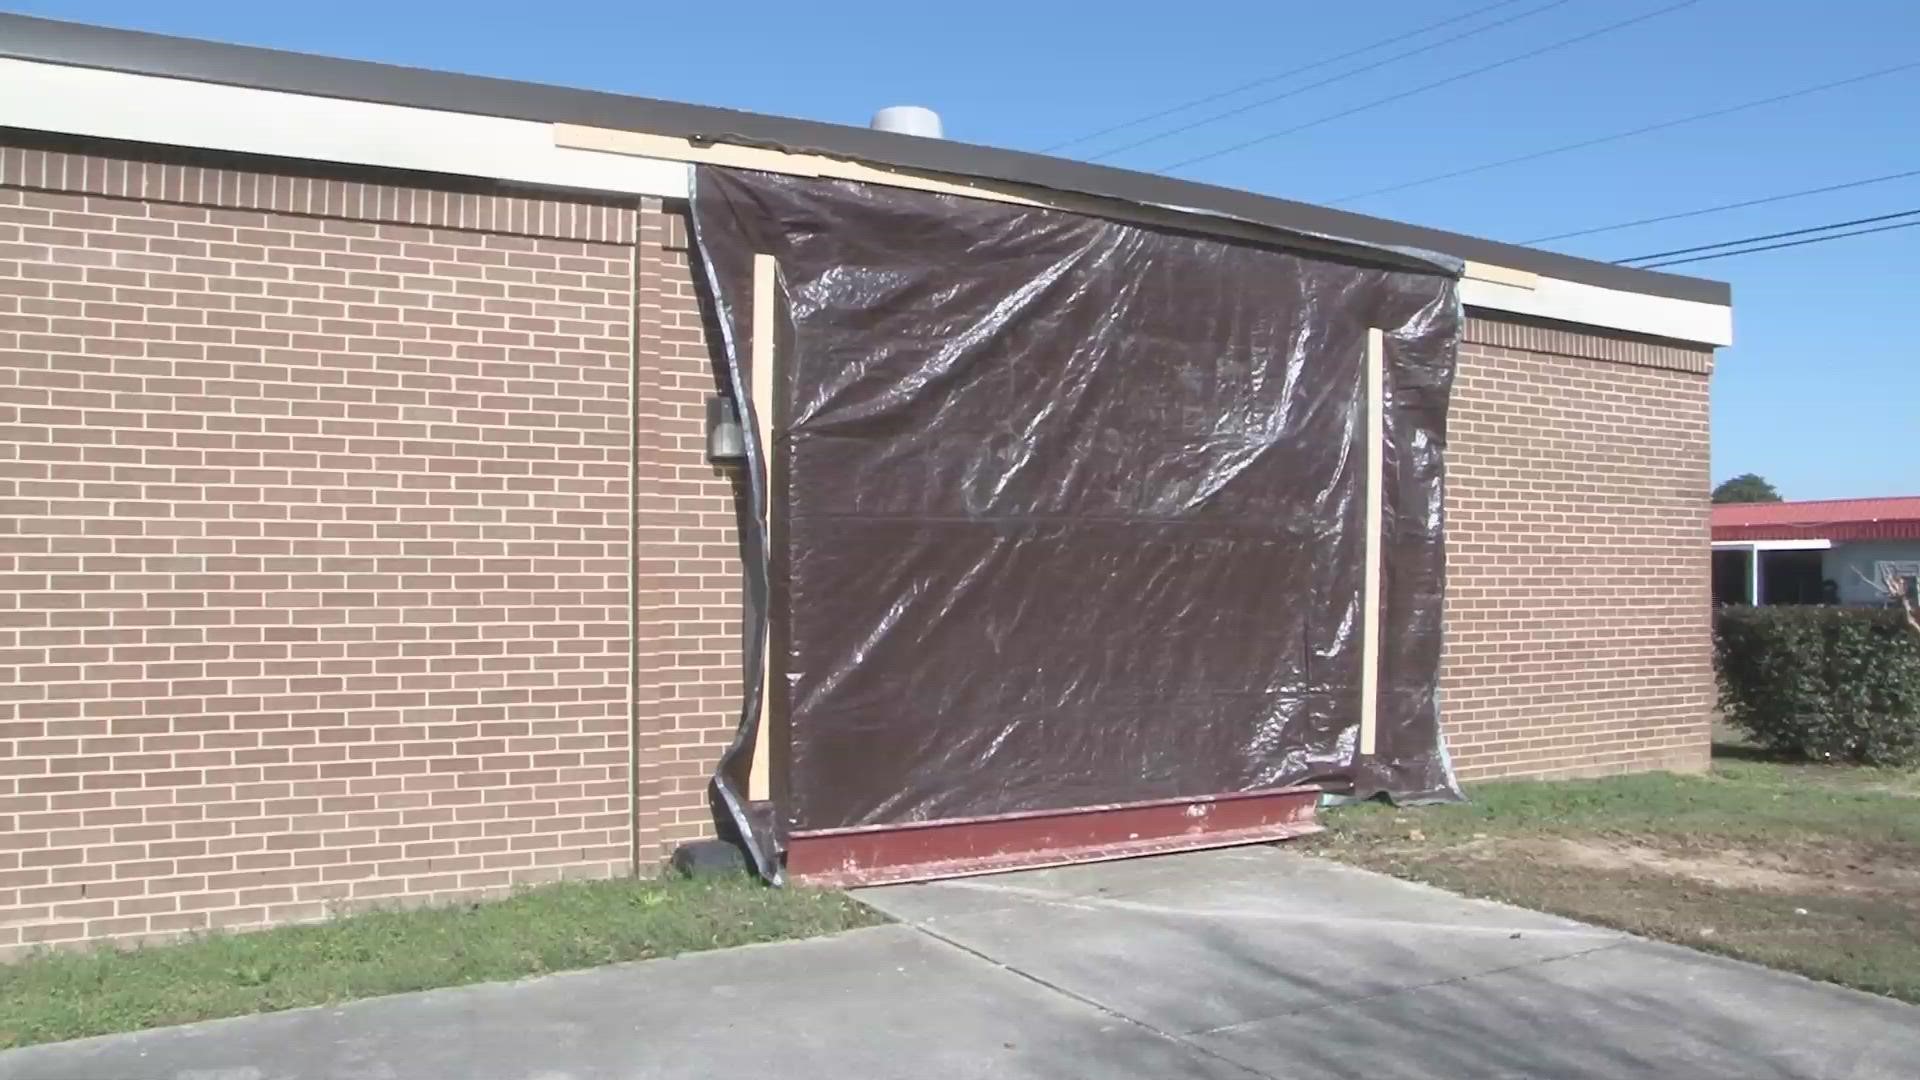 Seven children are facing charges after an SUV was stolen from a driveway on New Year’s Day and crashed into a Macon-Bibb County fire station.